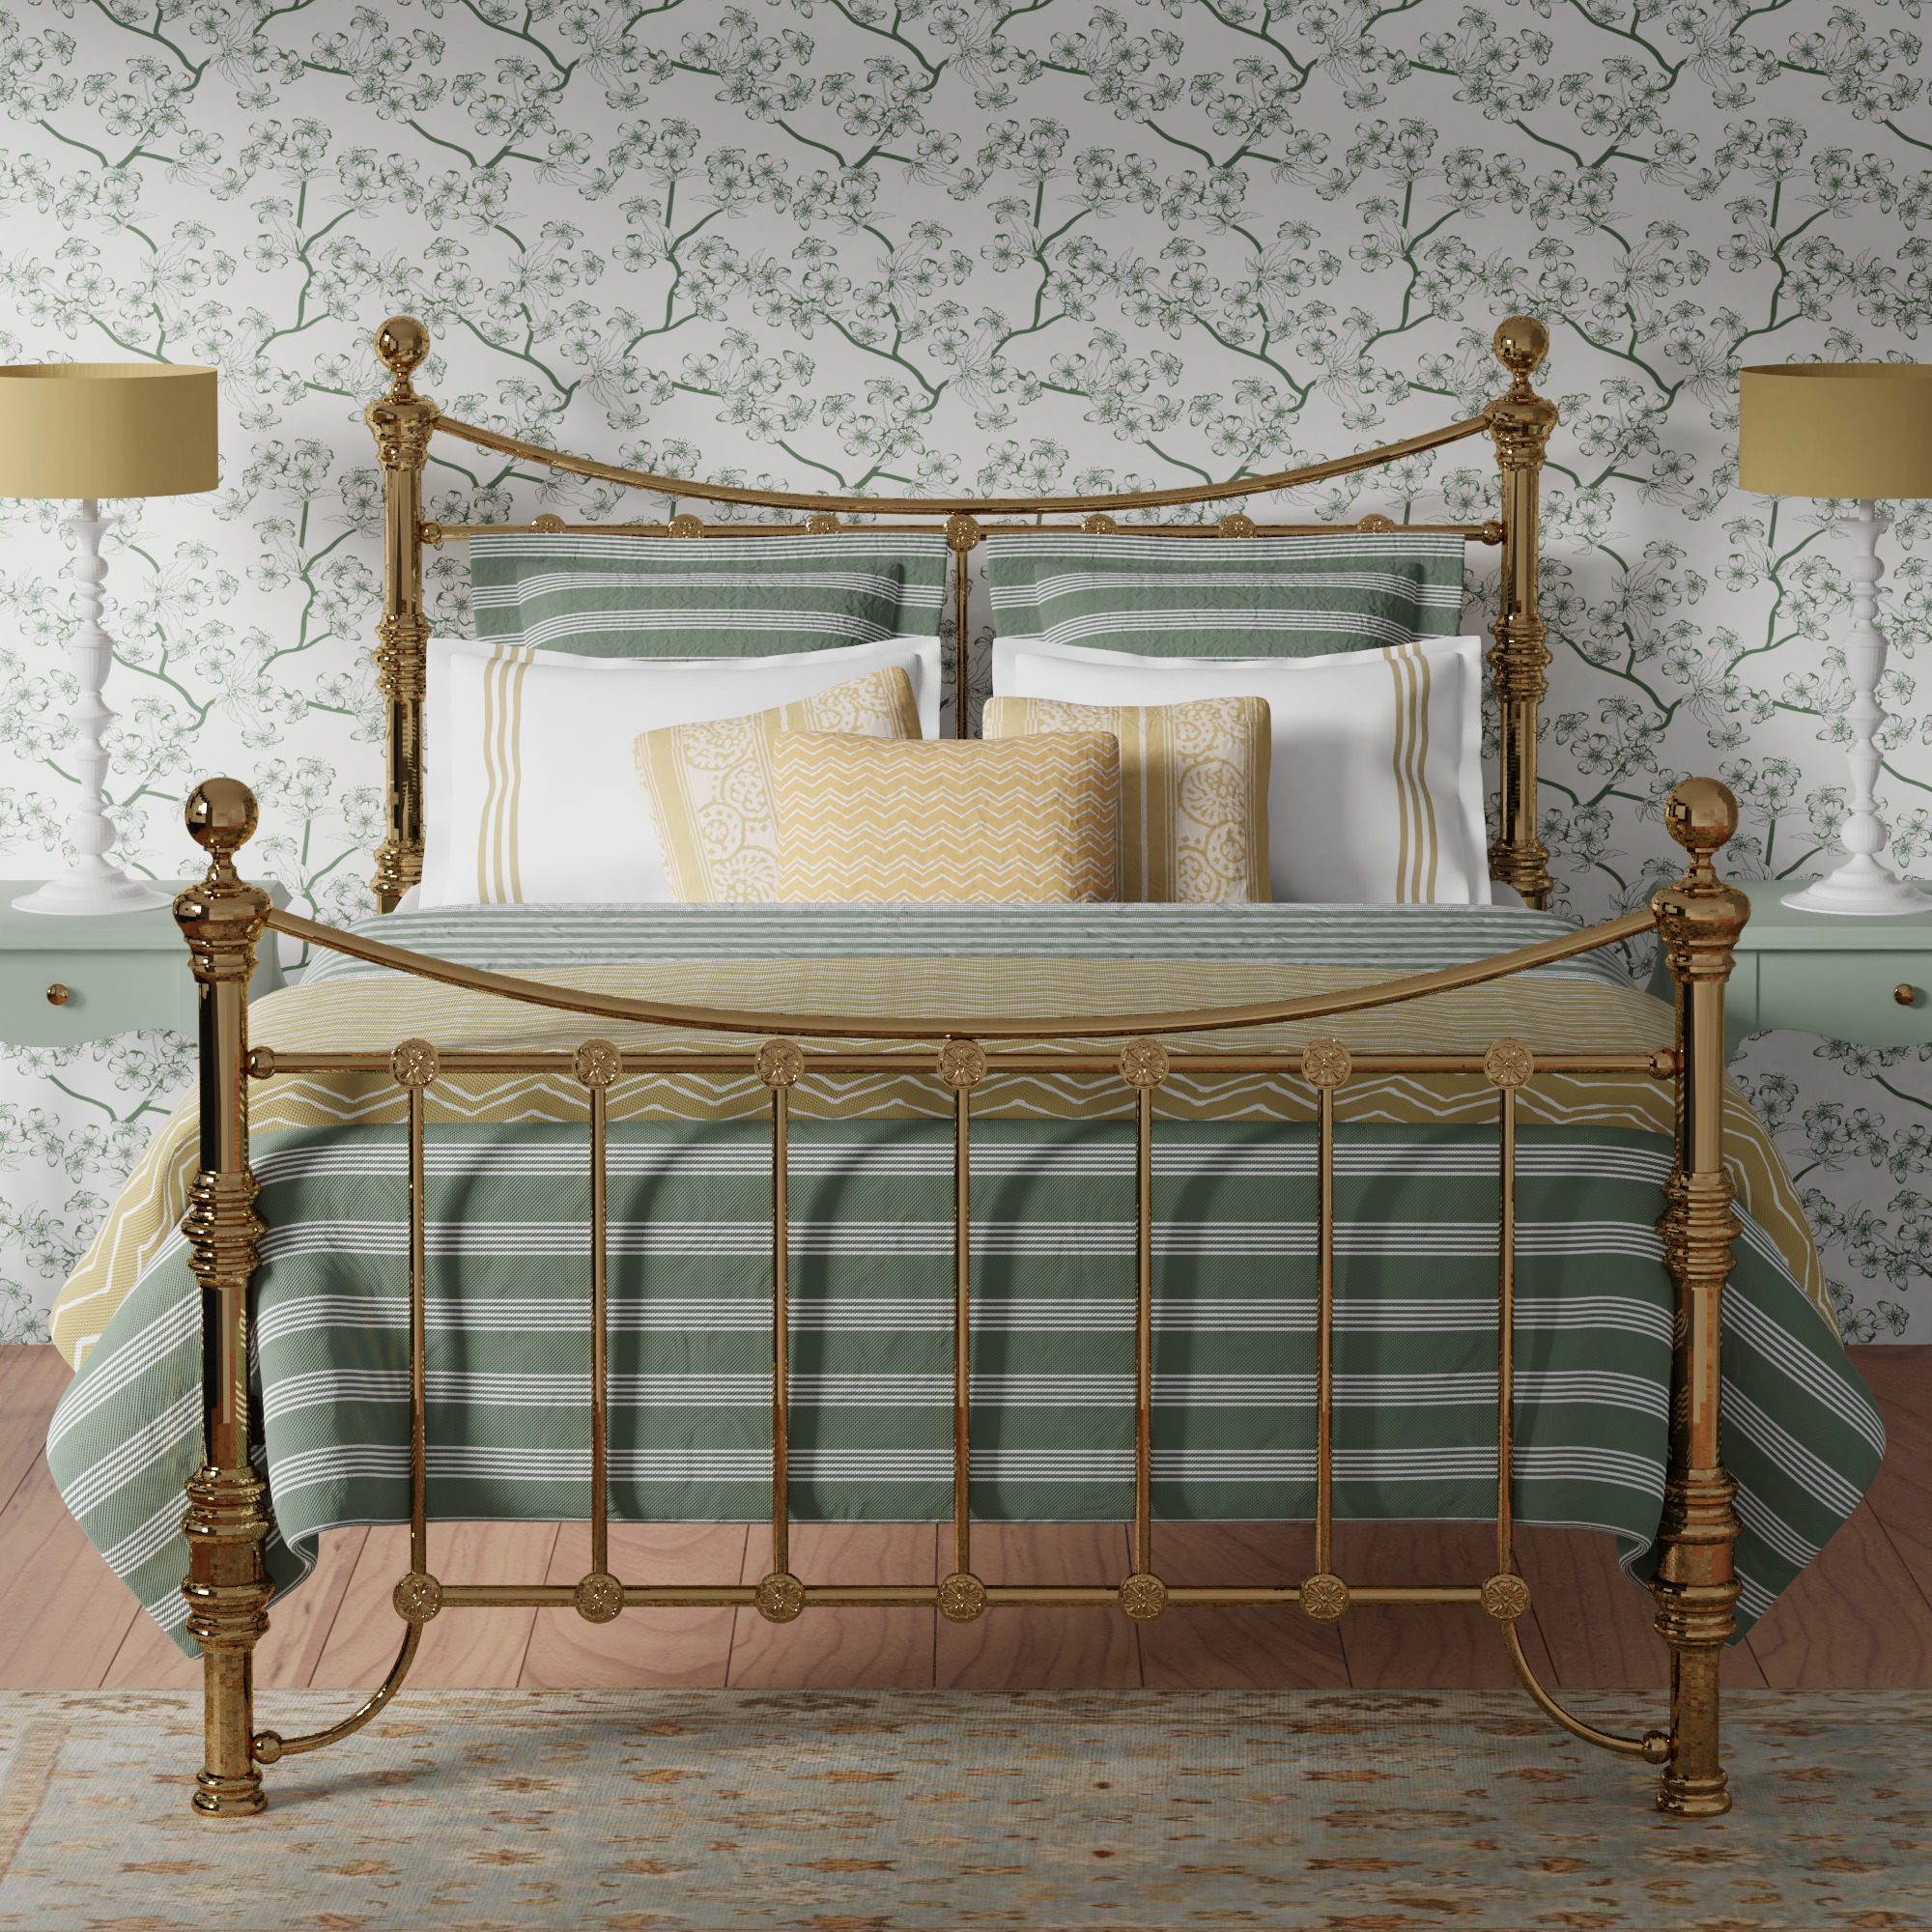 Arran brass bed - Image green and gold